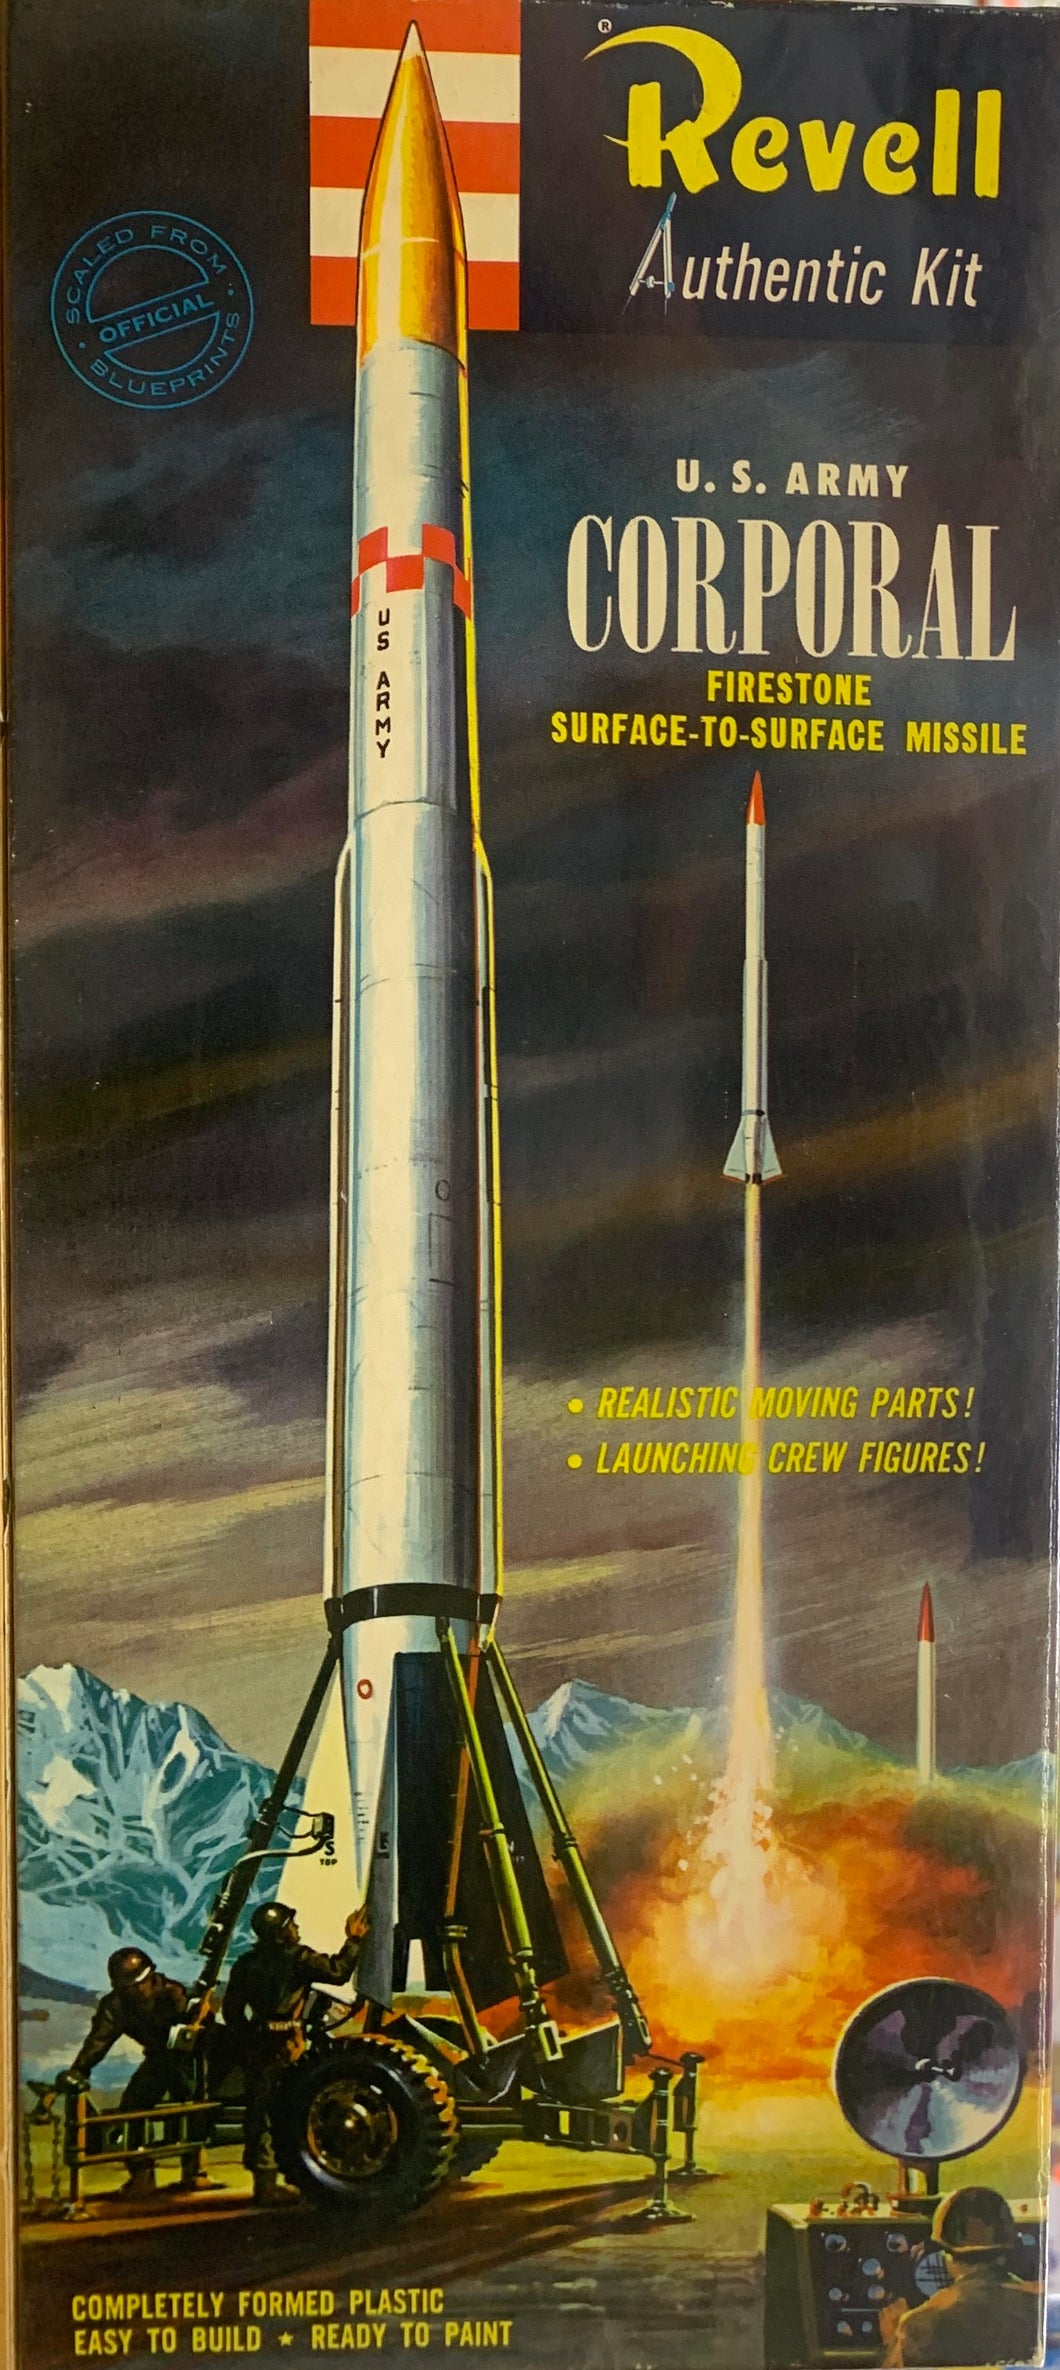 Corporal Missile - Firestone Surface-to-Surface Missile - 'S' Issue  1/40 1958 ISSUE